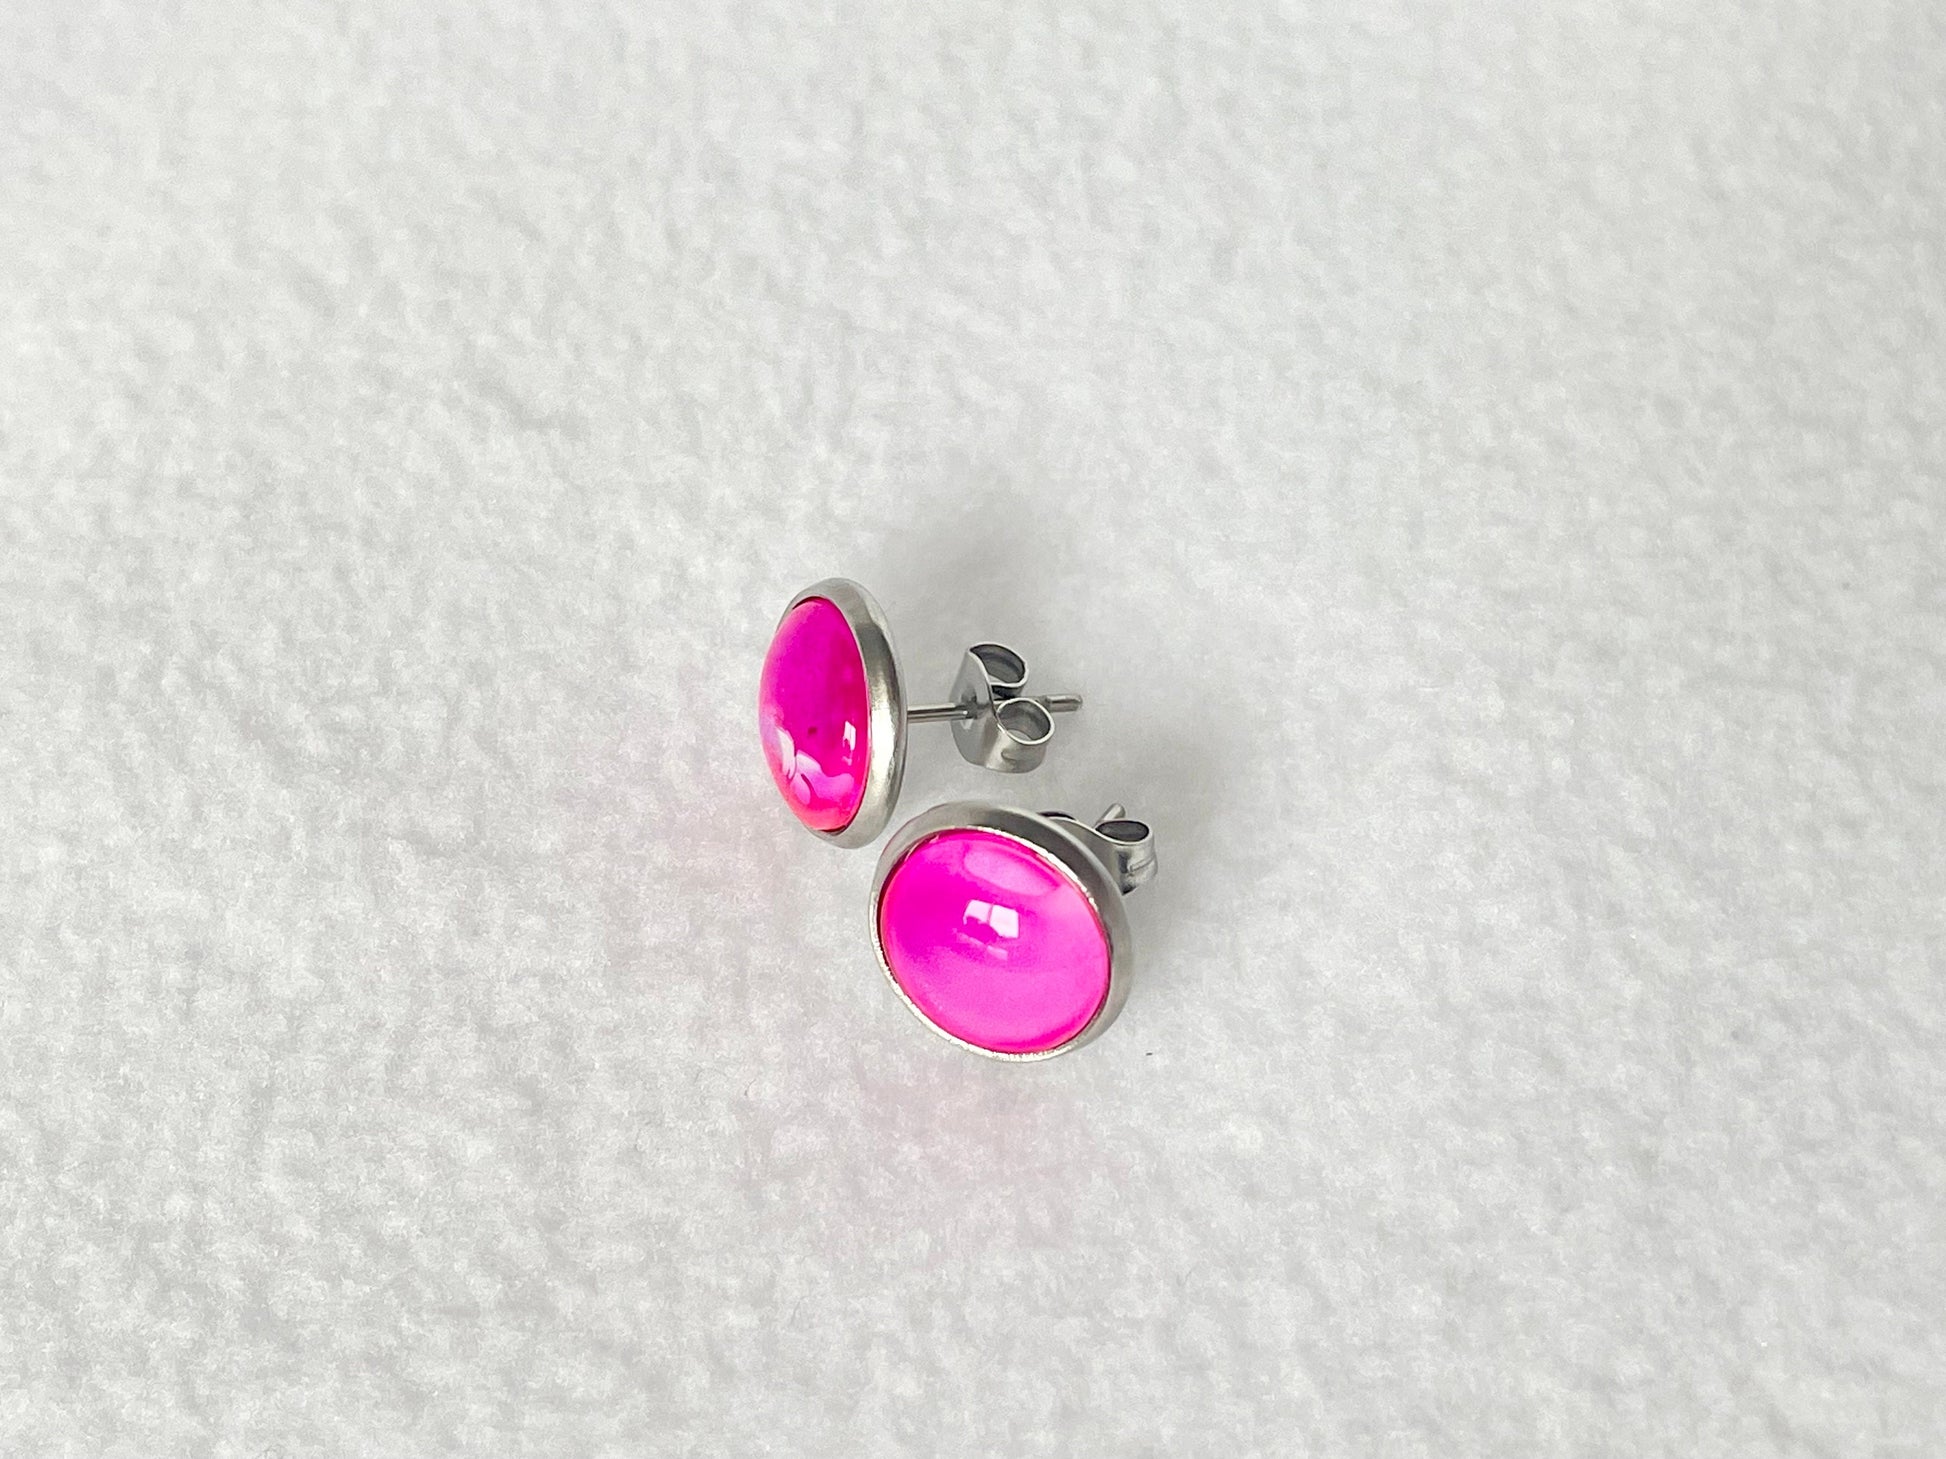 Bright pink stud earrings in stainless steal setting, hypoallergenic and lightweight.